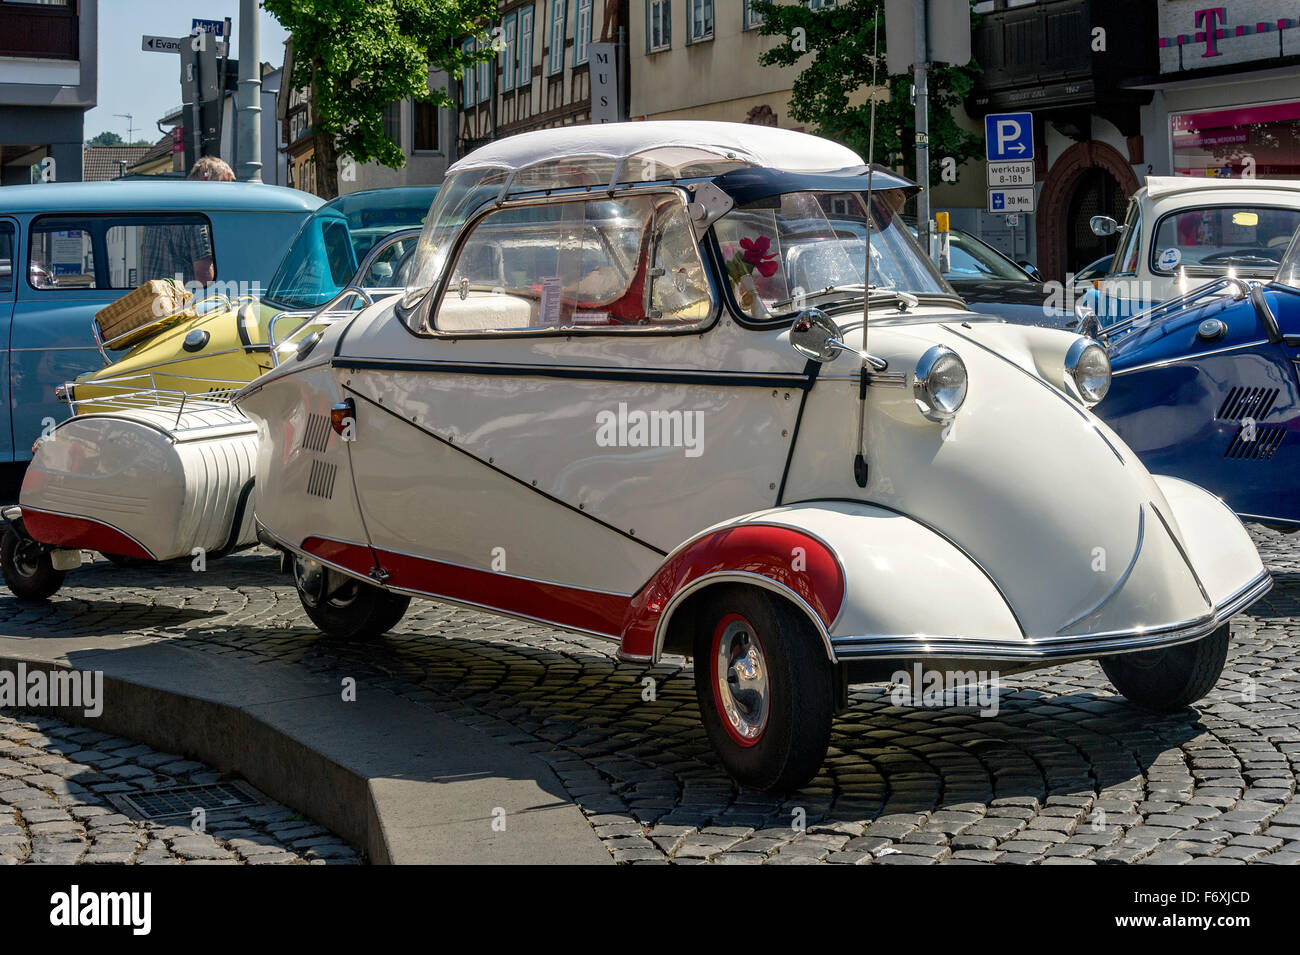 Oldtimer meeting, Vintage Messerschmitt KR 200 with a glass roof, sunscreen and trailer, built from 1955 to 1964, market place Stock Photo